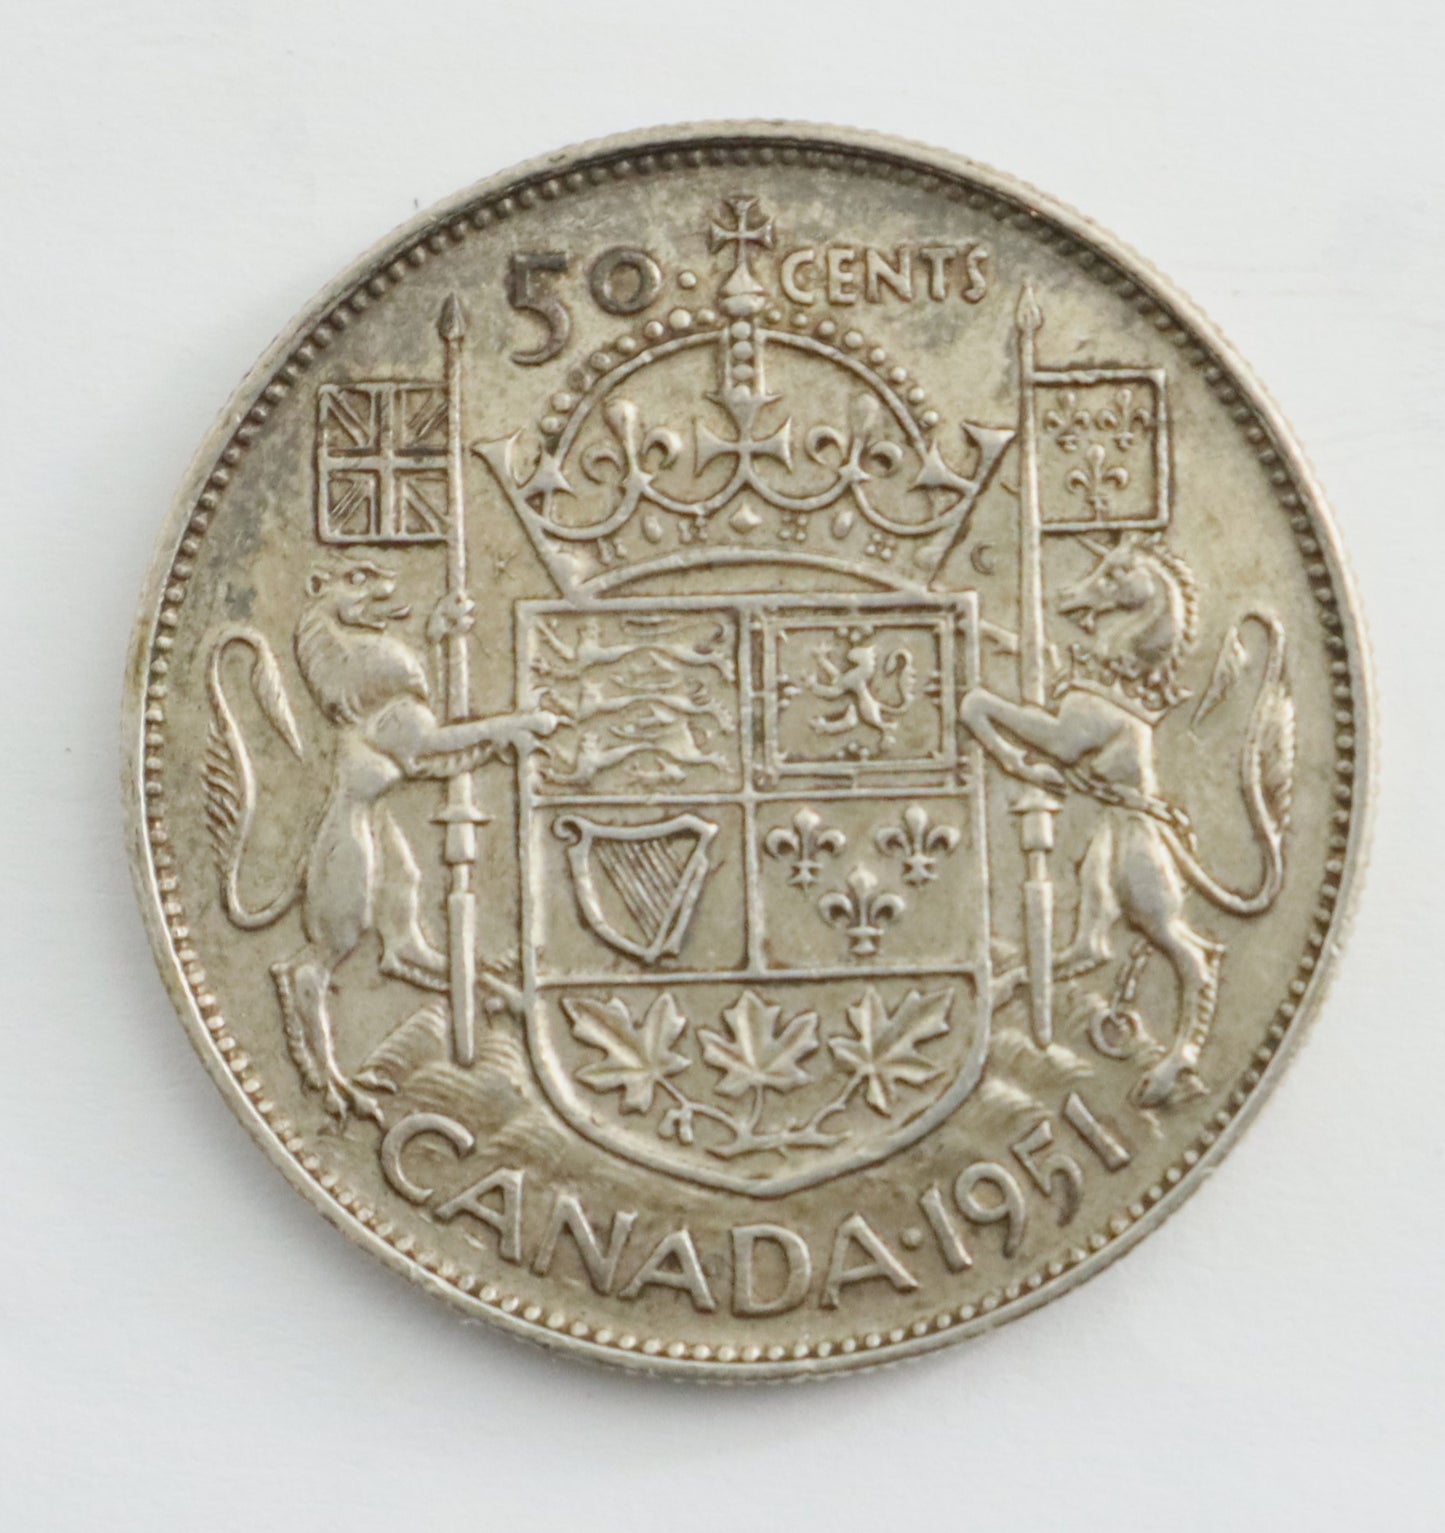 1951 Canadian Silver 50 Cent Coin Narrow Date ND Cat #C0140